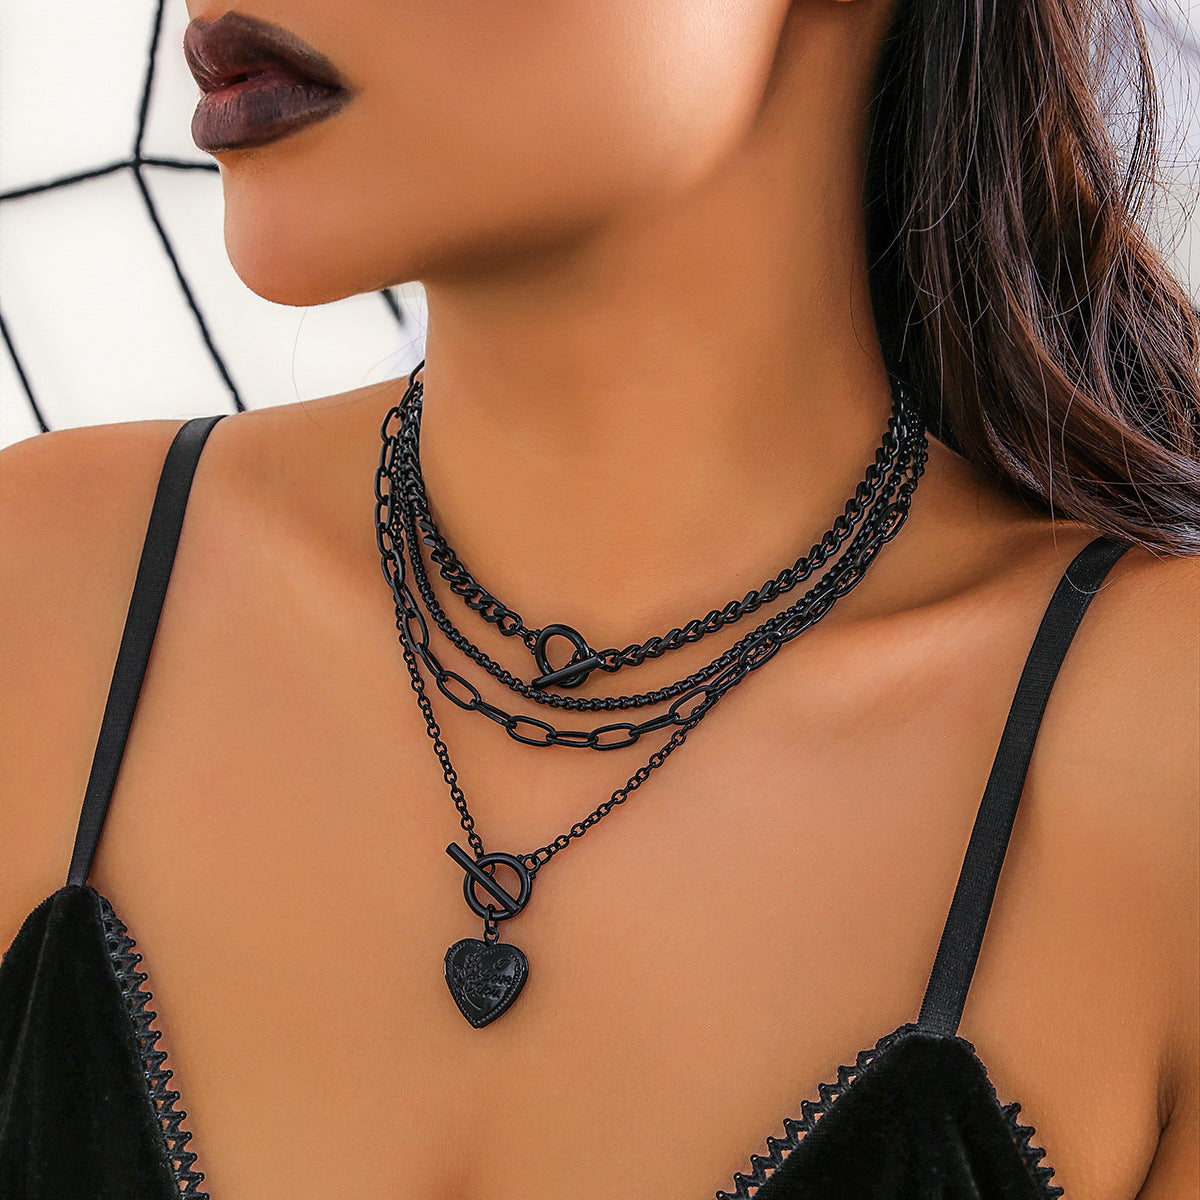 European and American Black Peach Heart Necklace with Hip-hop Spicy Girl Style